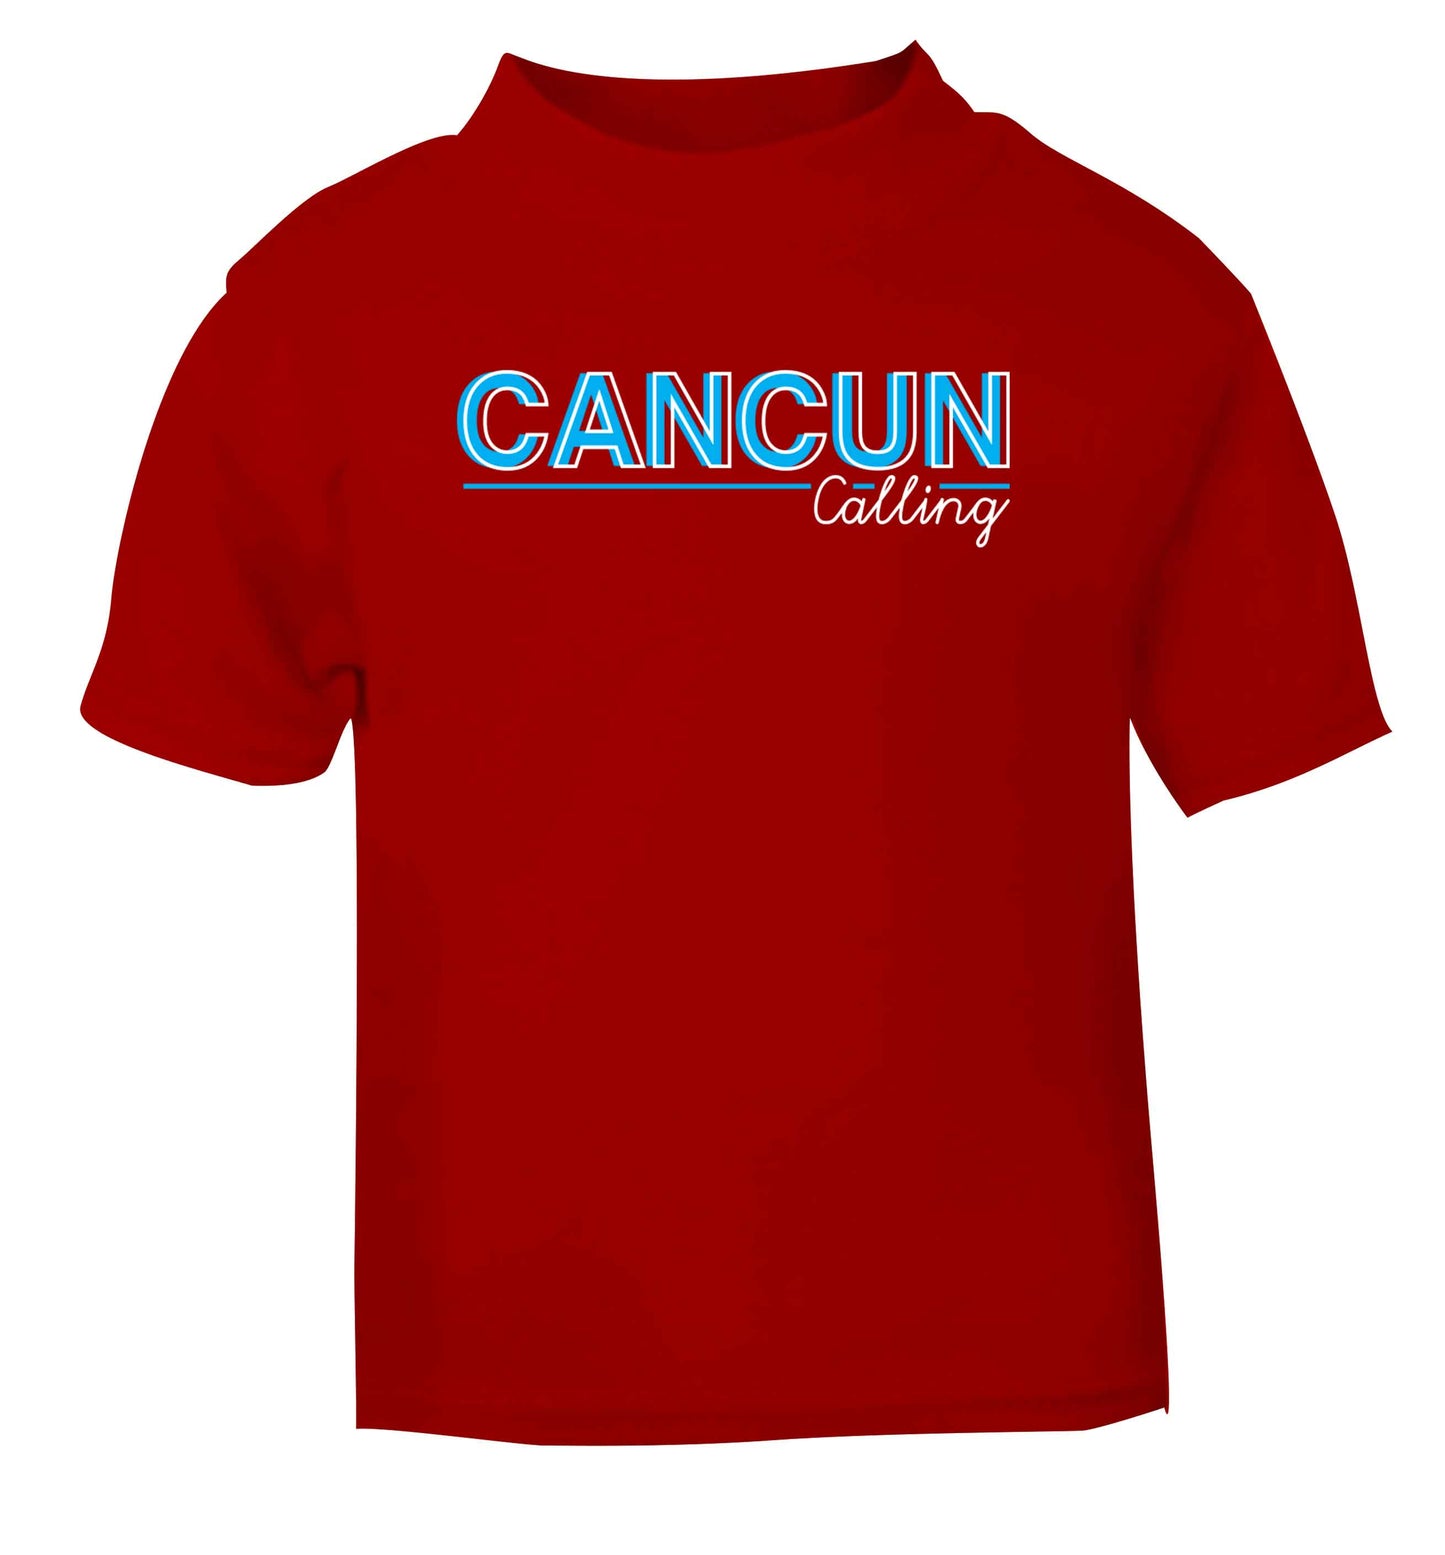 Cancun calling red Baby Toddler Tshirt 2 Years